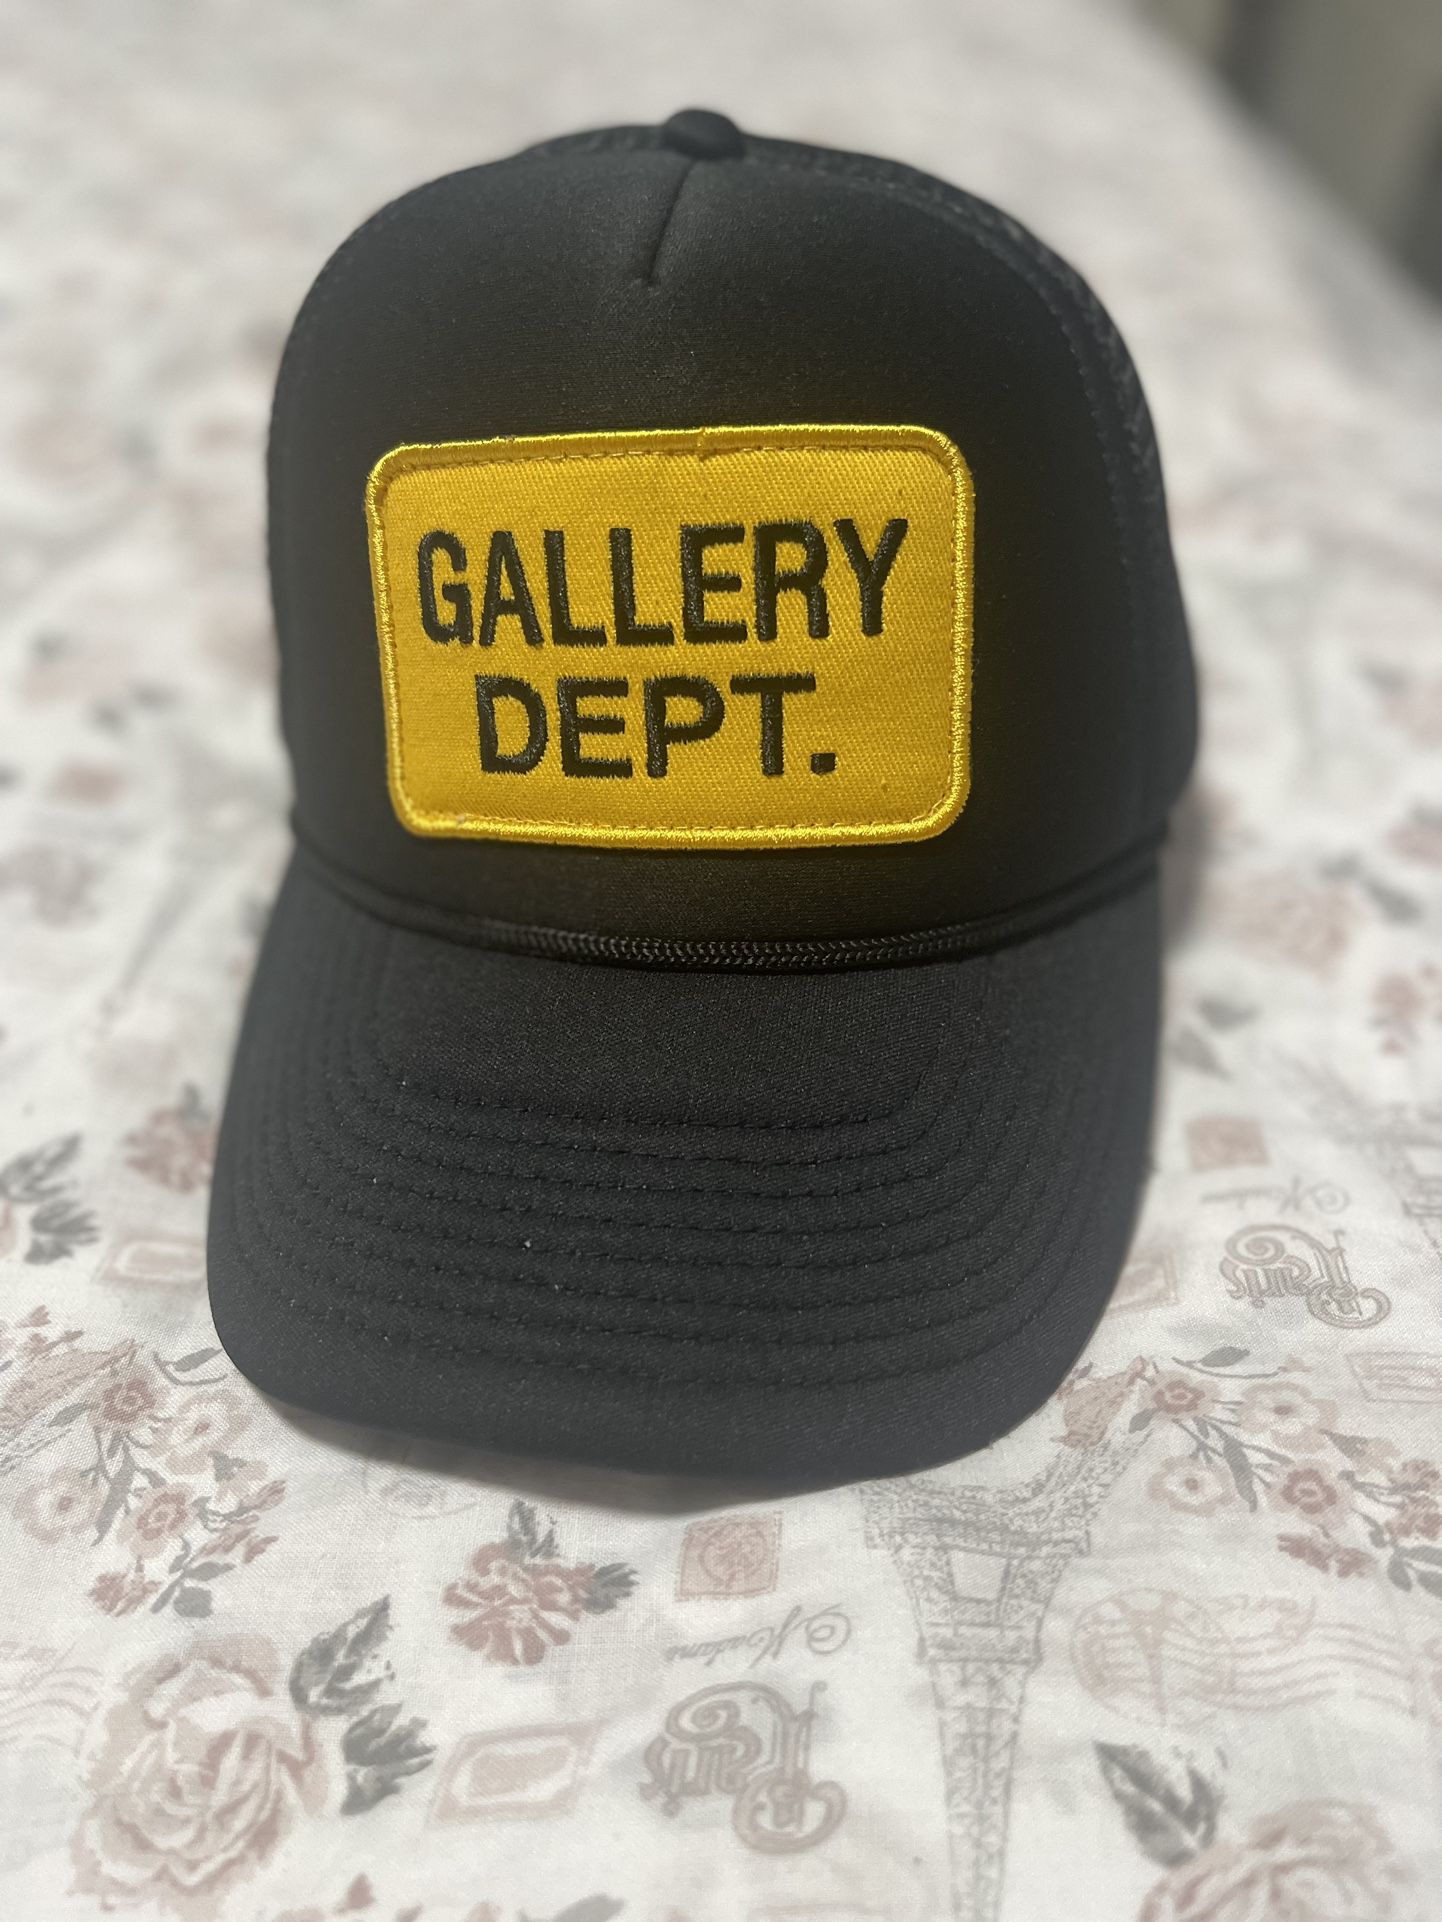 Gucci Hat for Sale in Philadelphia, PA - OfferUp